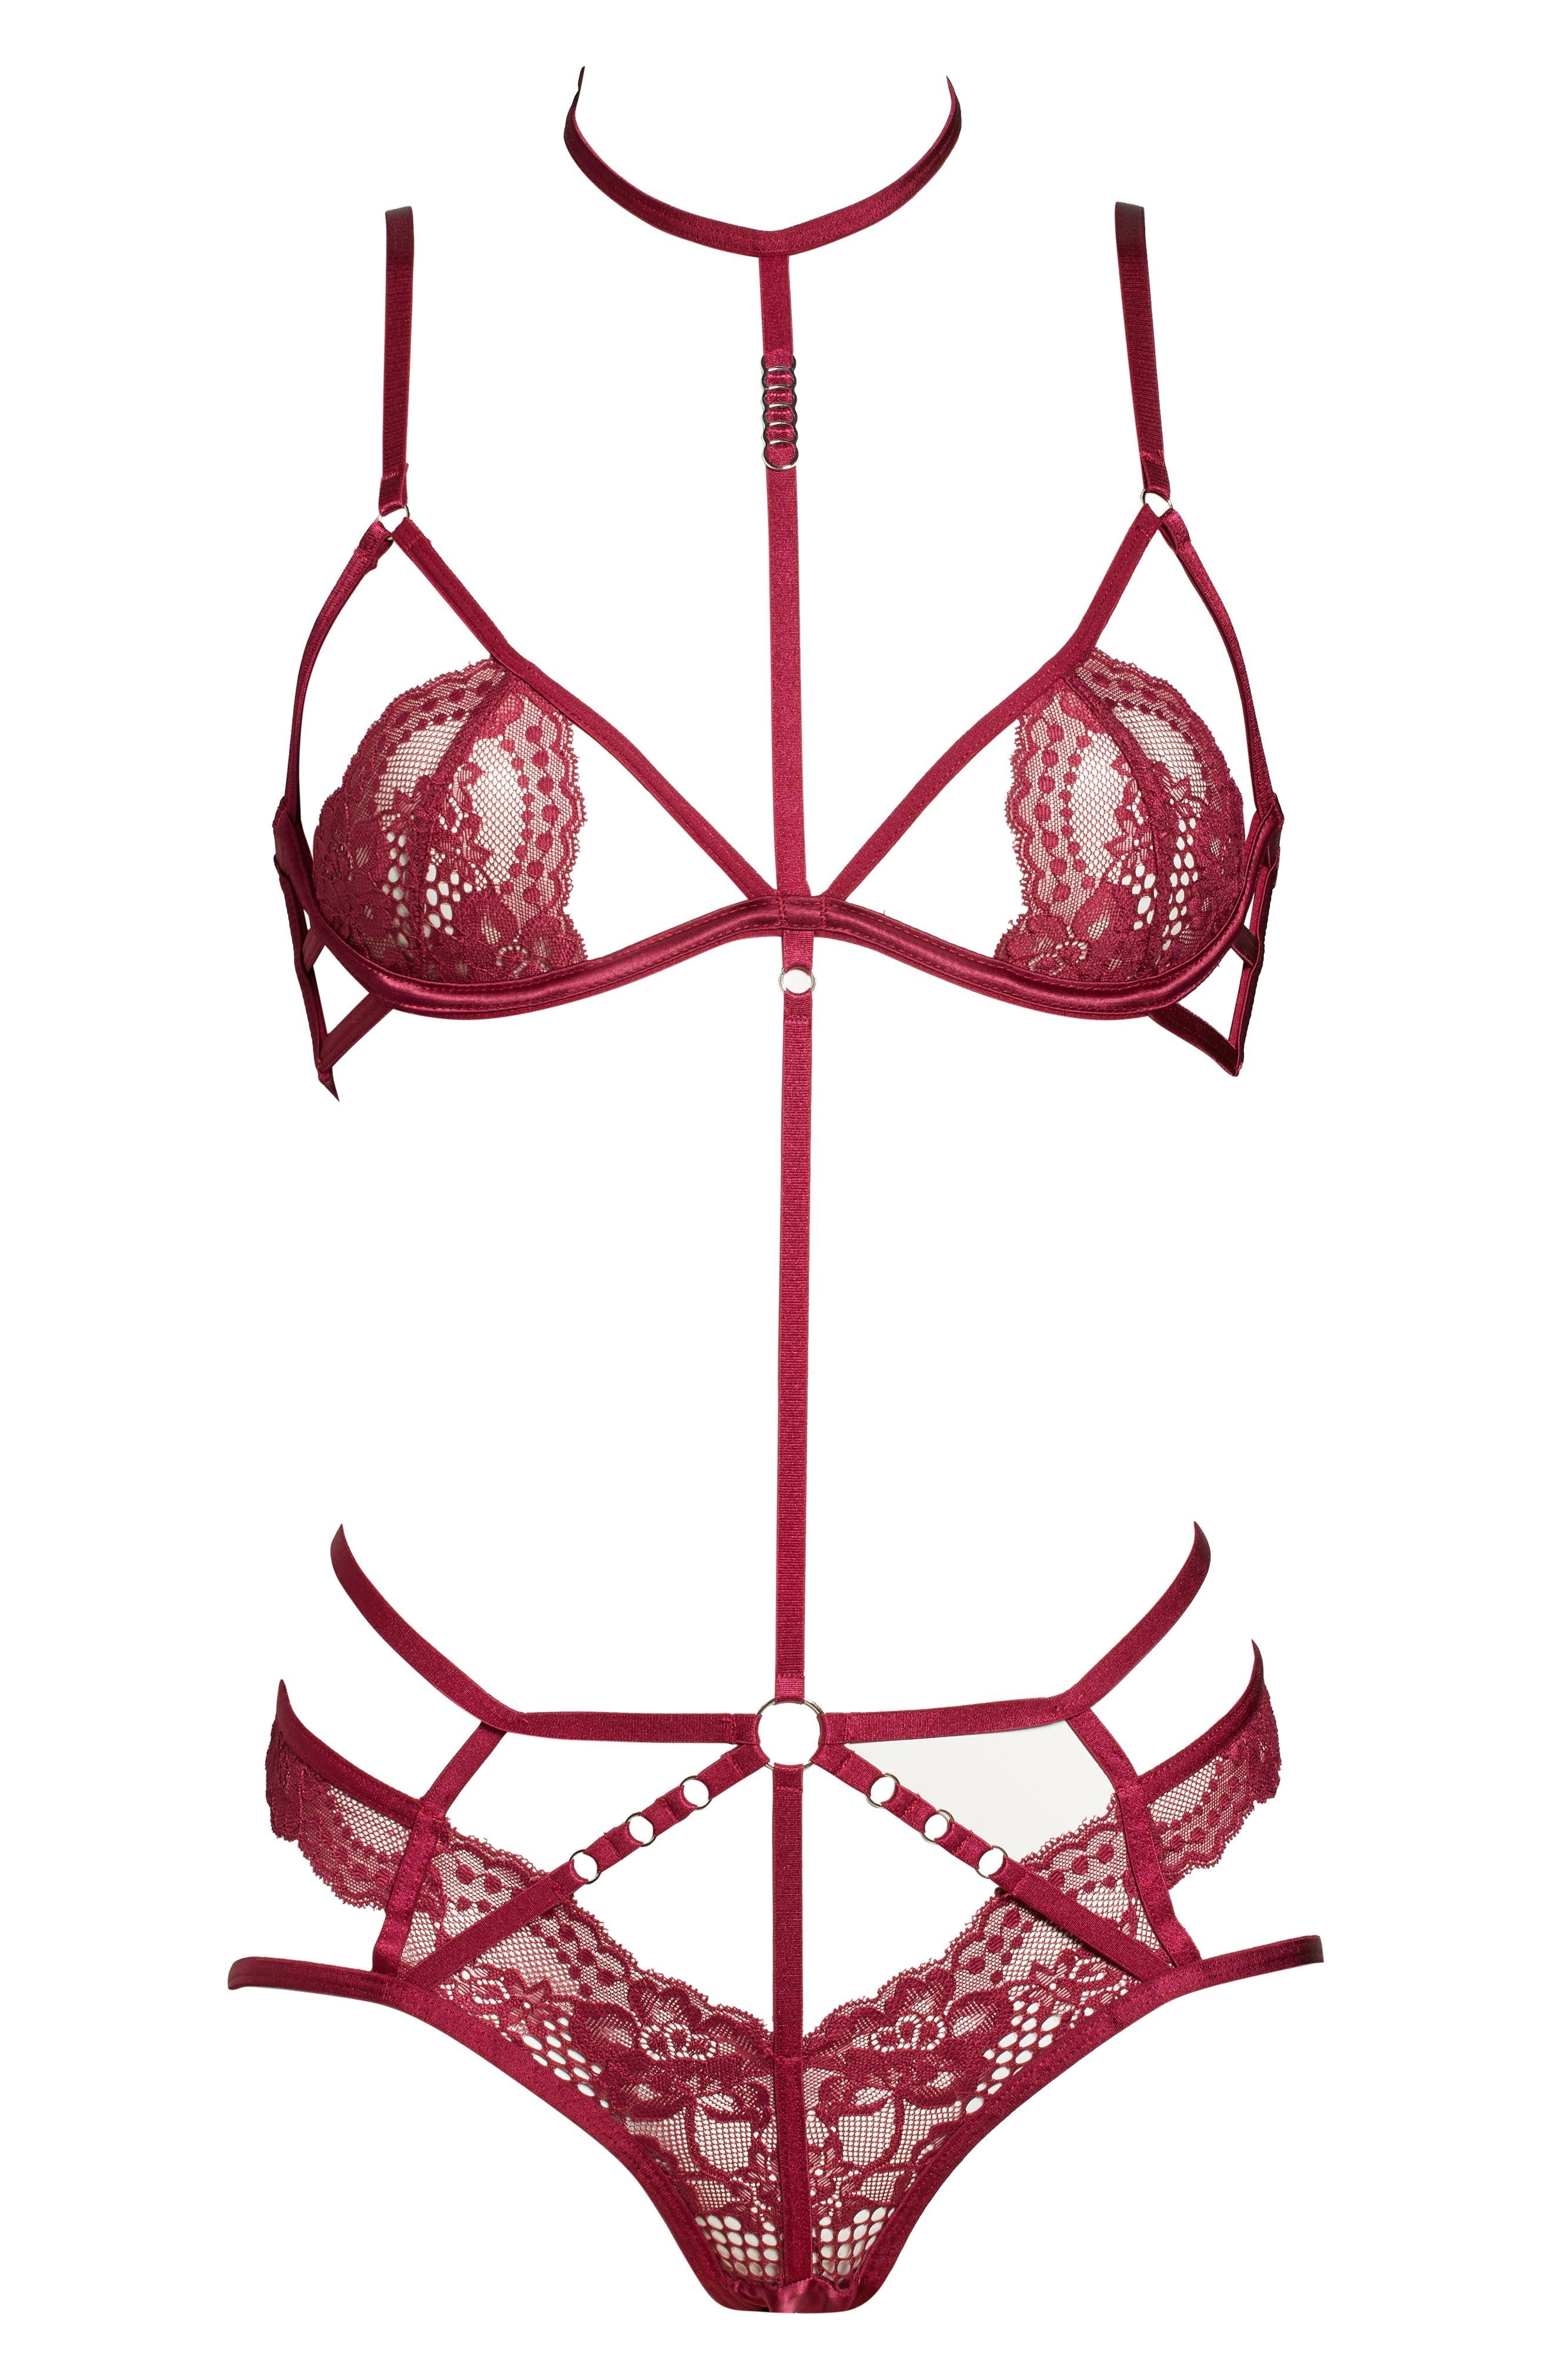 Hunkemöller Luxure Body Lace Strappy Teddy in Red